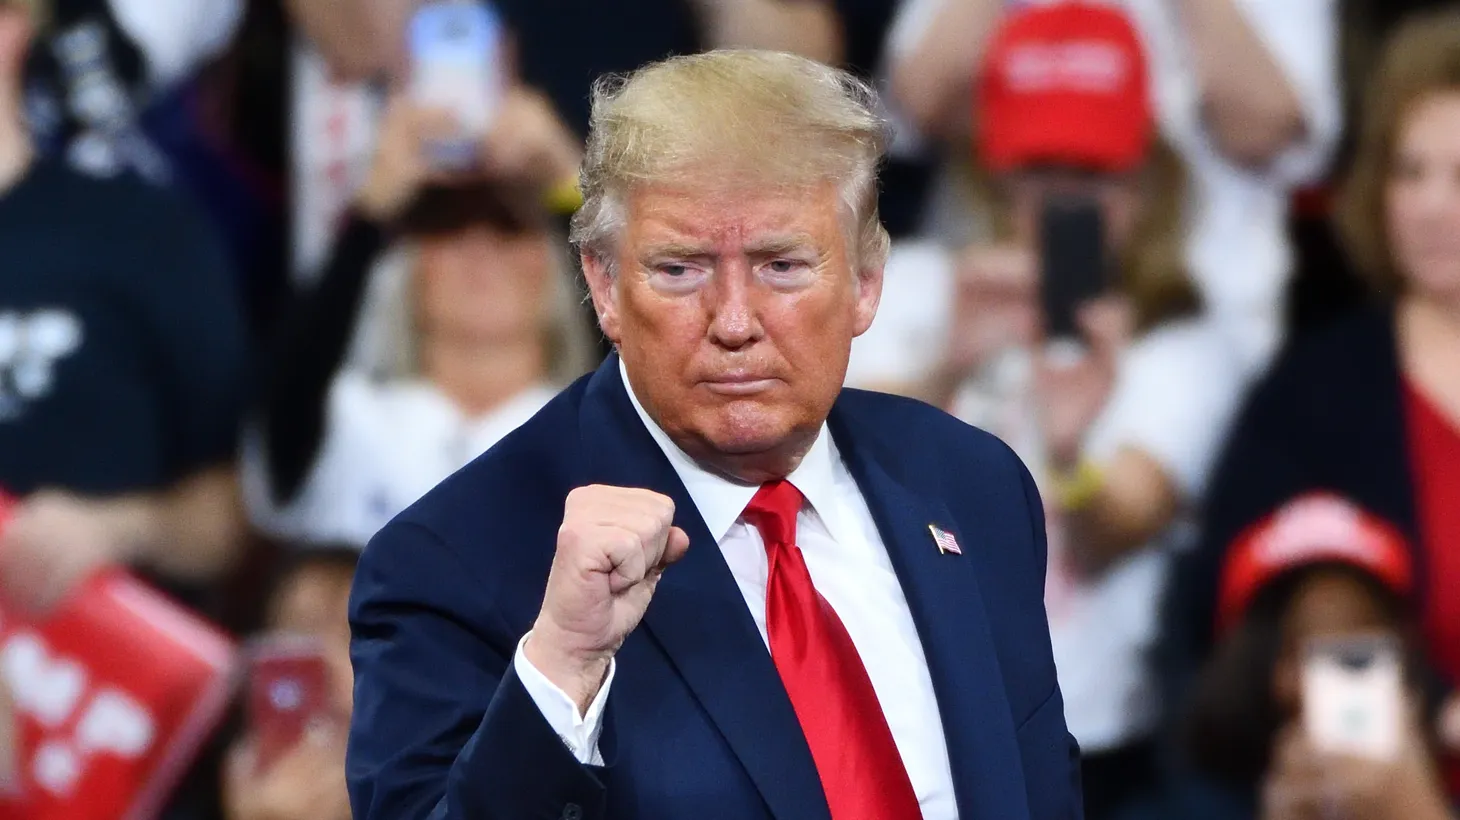 President Donald Trump gestures a confident fist pump onstage at a campaign rally at the Giant Center, Hershey, Pennsylvania, December 10, 2019.